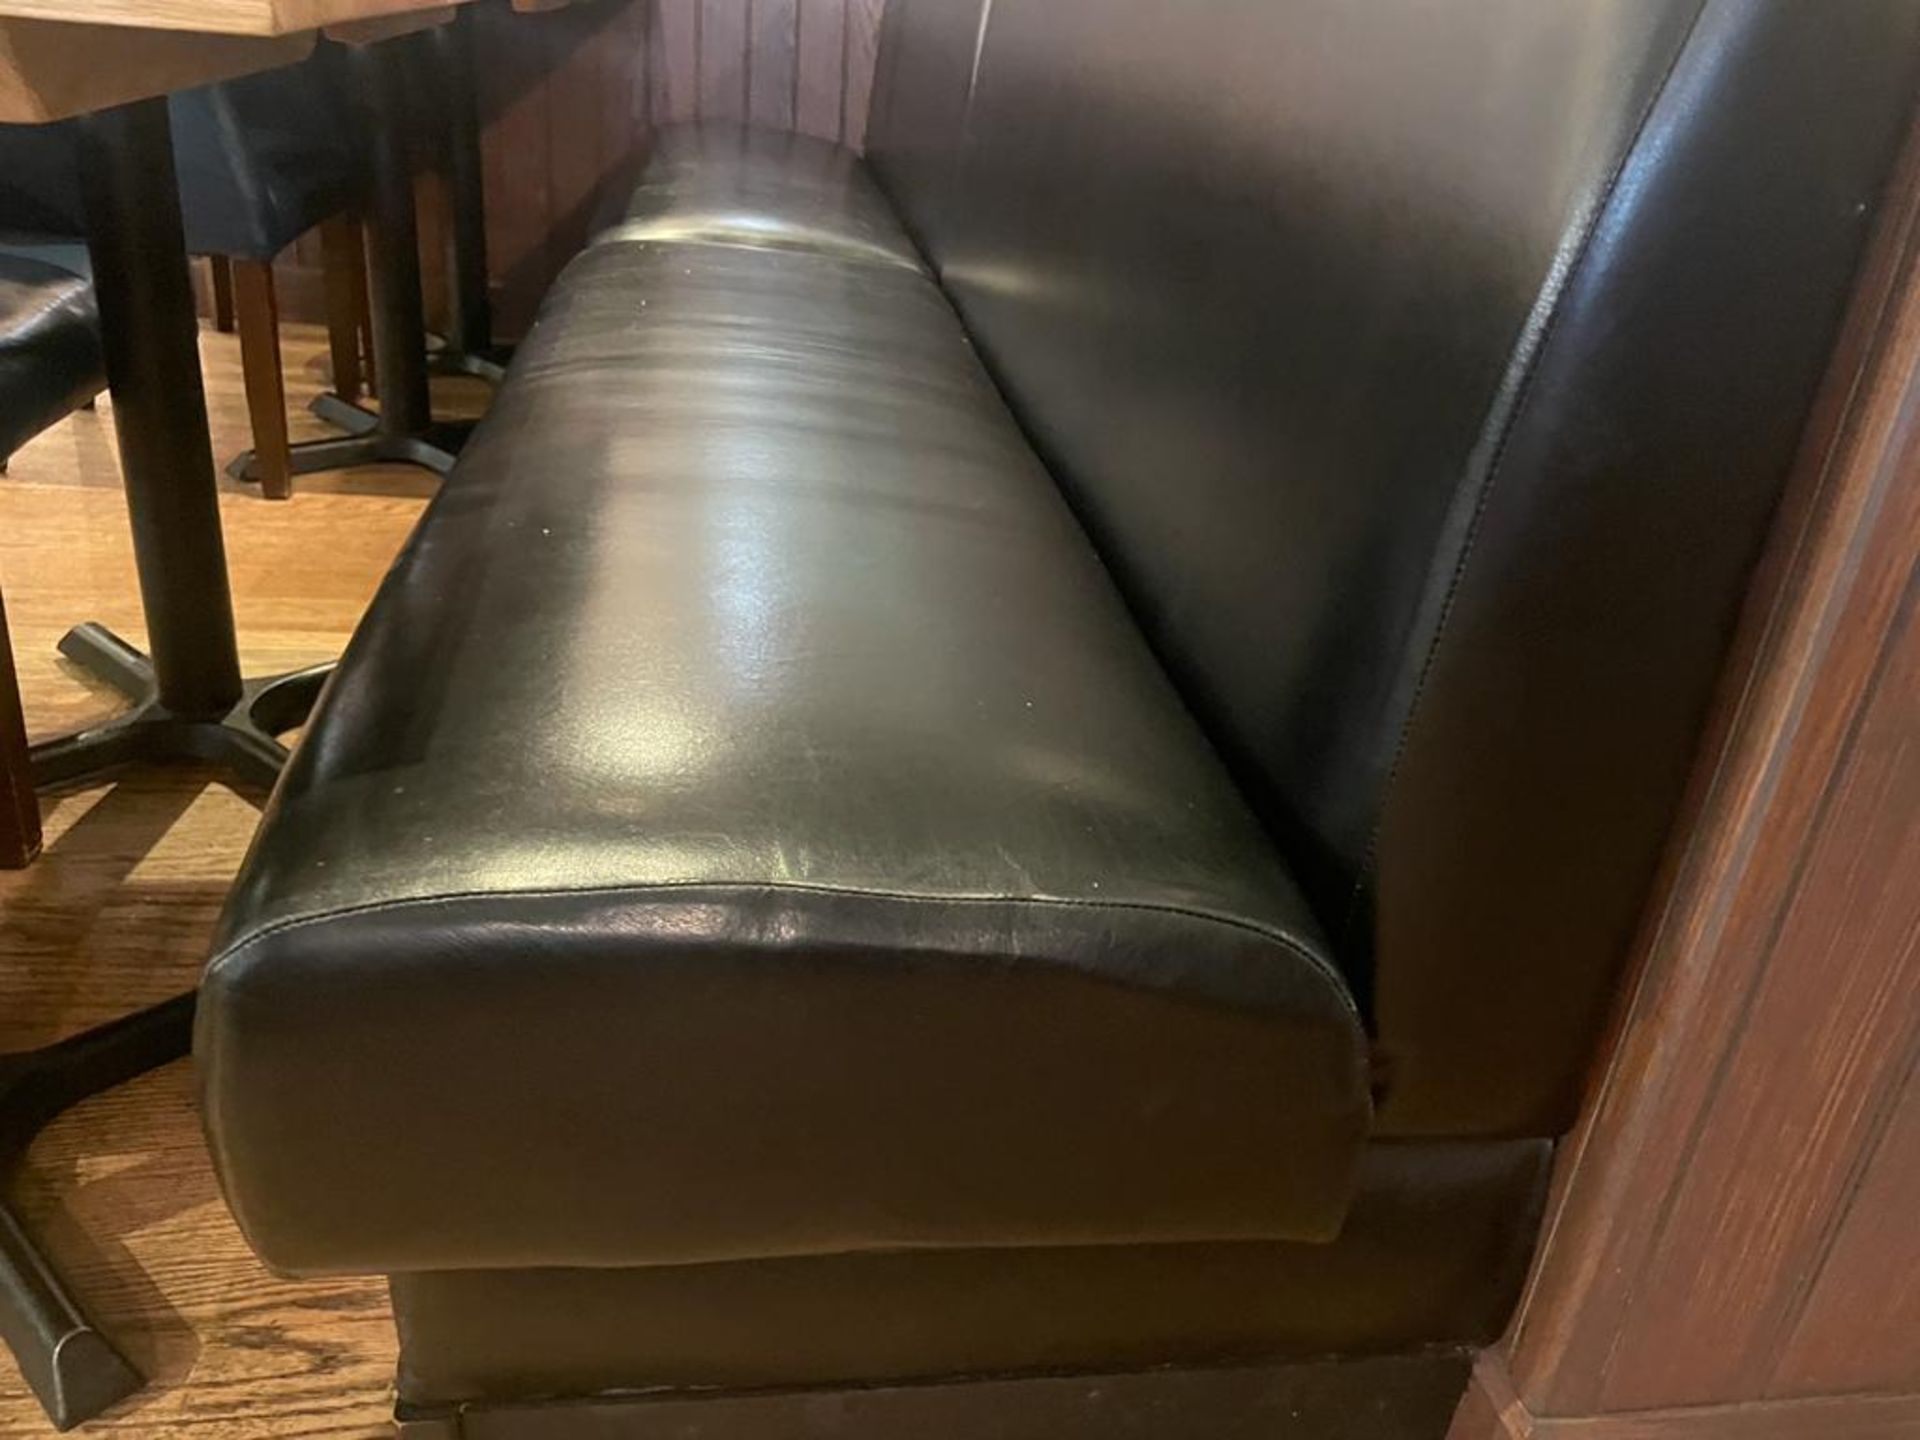 1 x Restaurant Seating Bench With a Black Faux Leather Upholstery - Approx 9ft in Length - Image 6 of 6